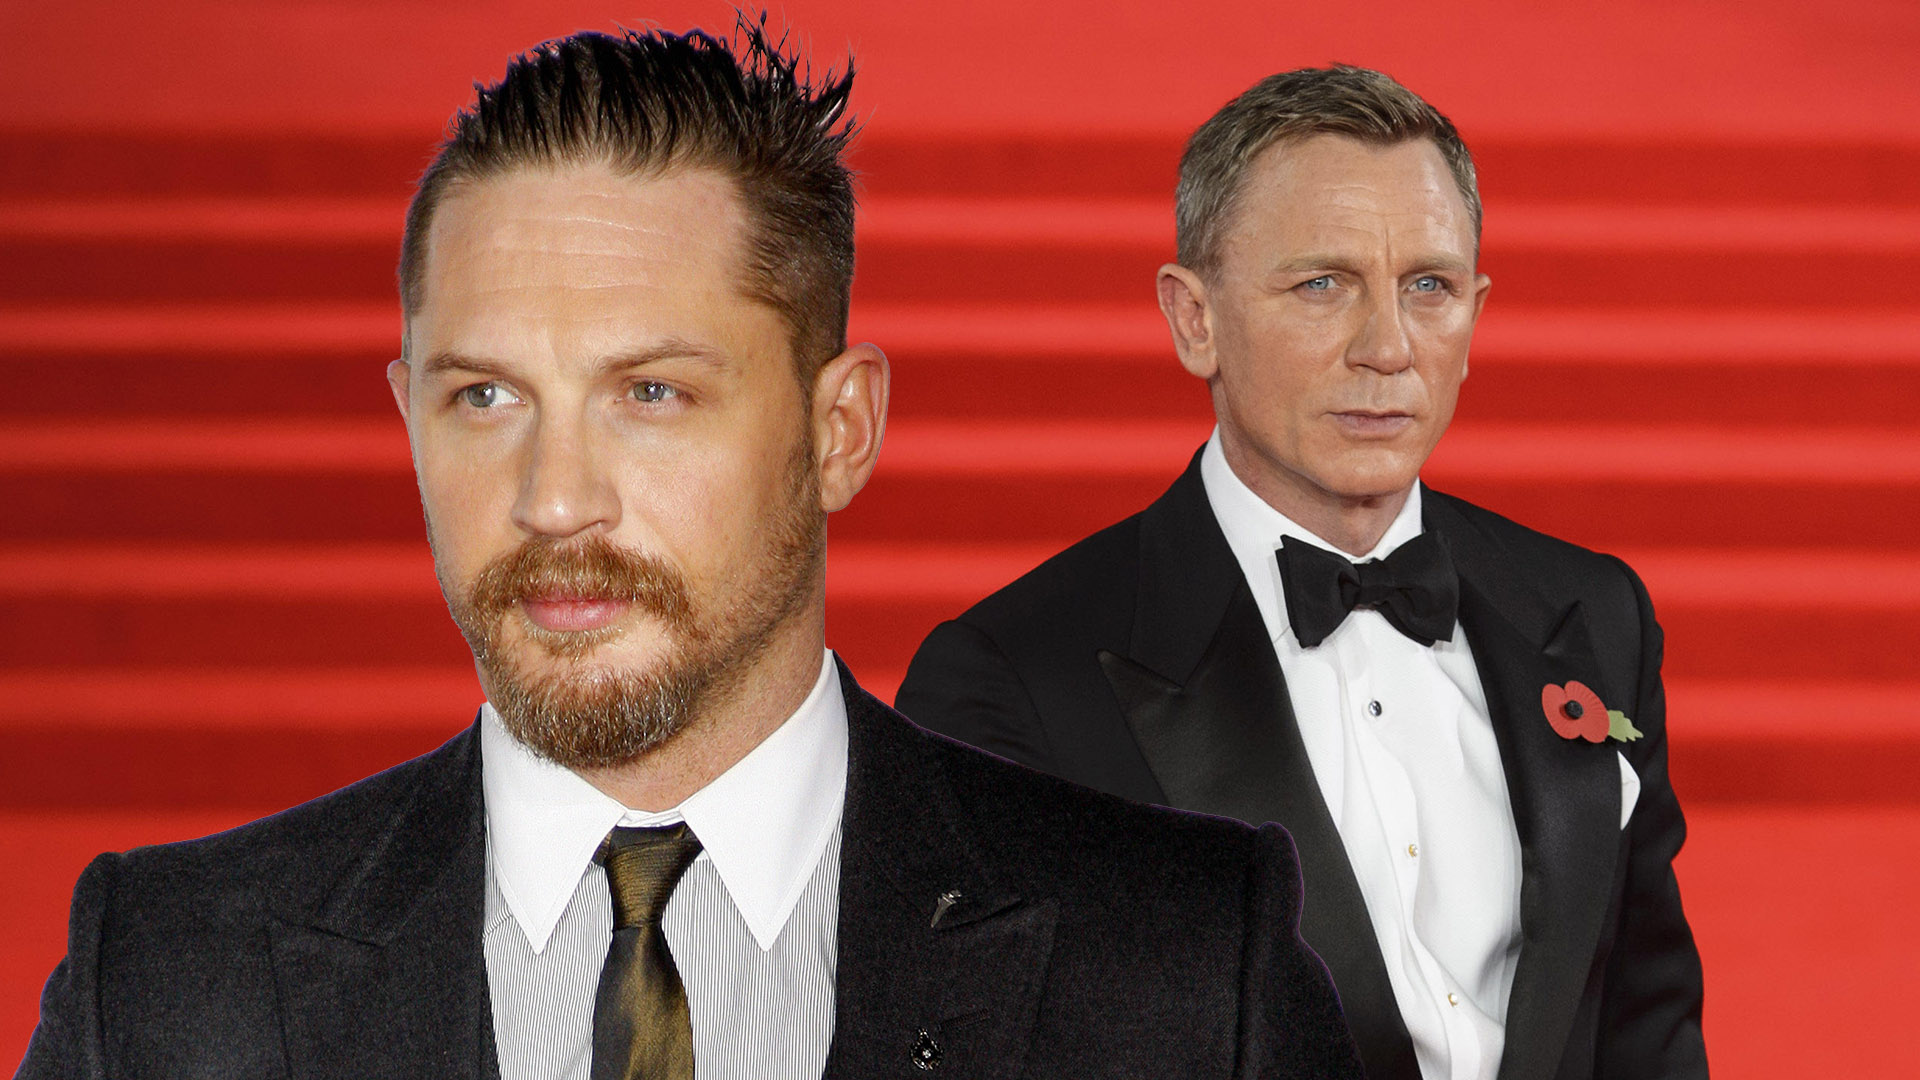 No Tom Hardy for You: 6 Actors Have Zero Chance Becoming Next Bond